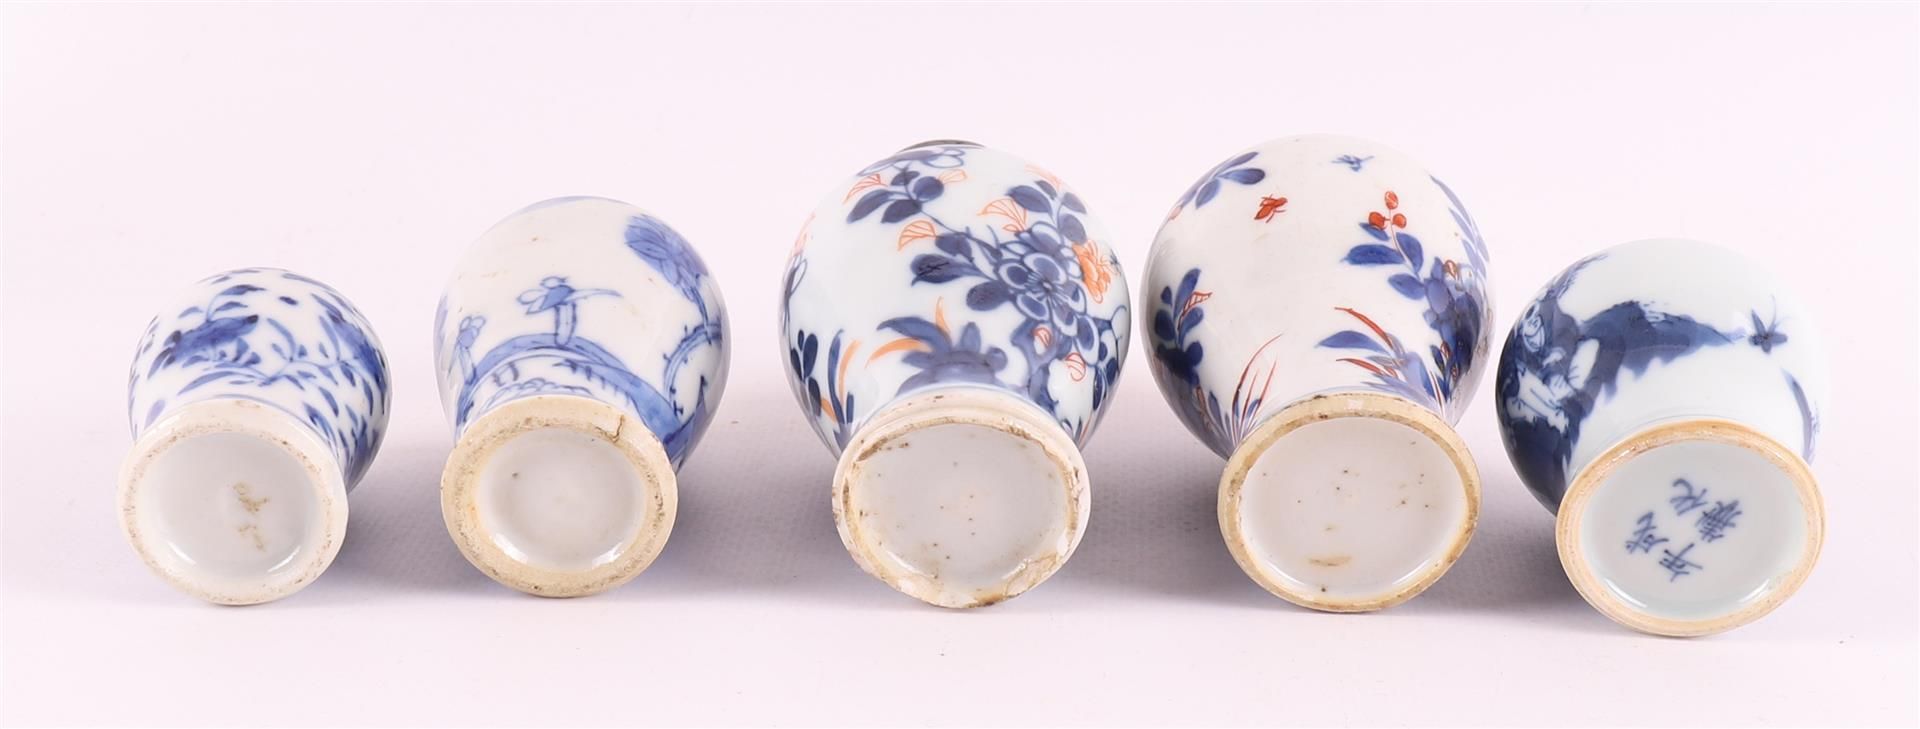 Various blue/white and Chinese Imari porcelain tiered vases, China 18th century - Image 5 of 8